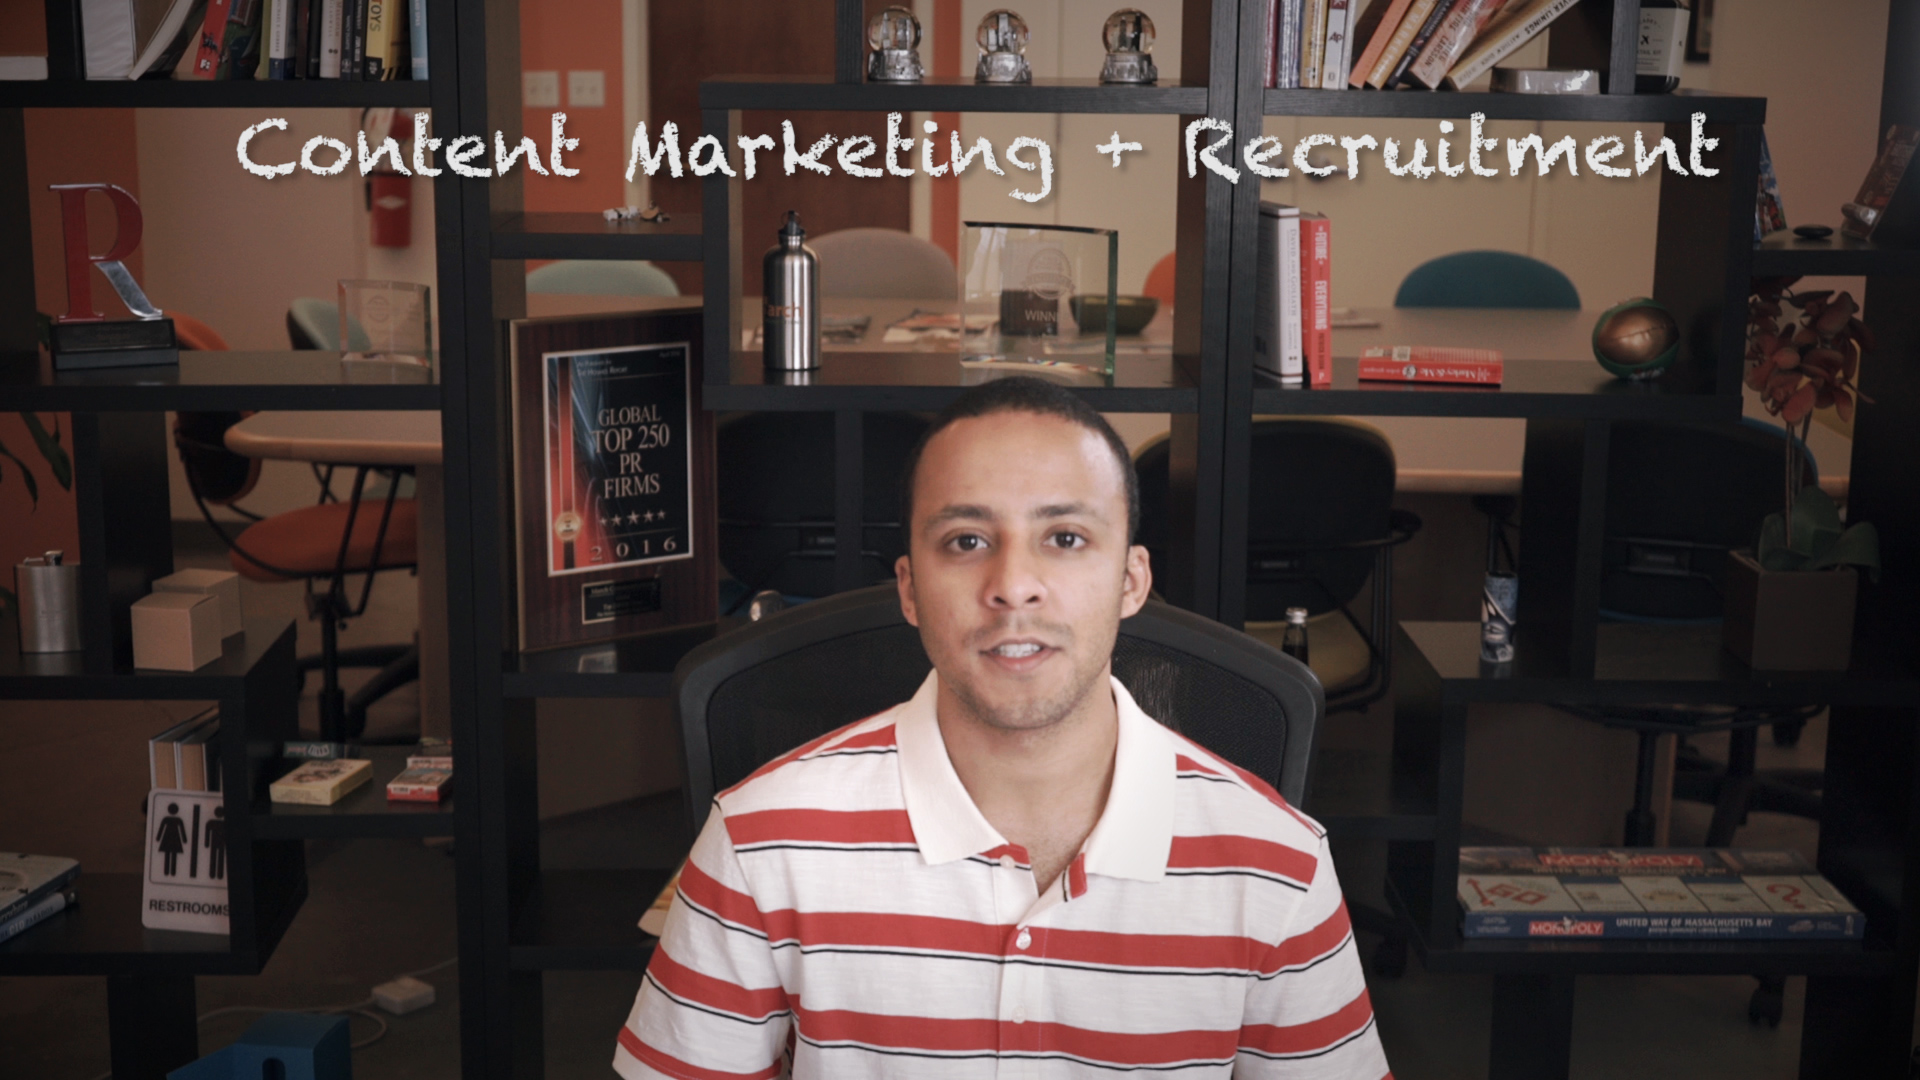 [Video] Content Marketing as a Recruitment Tool